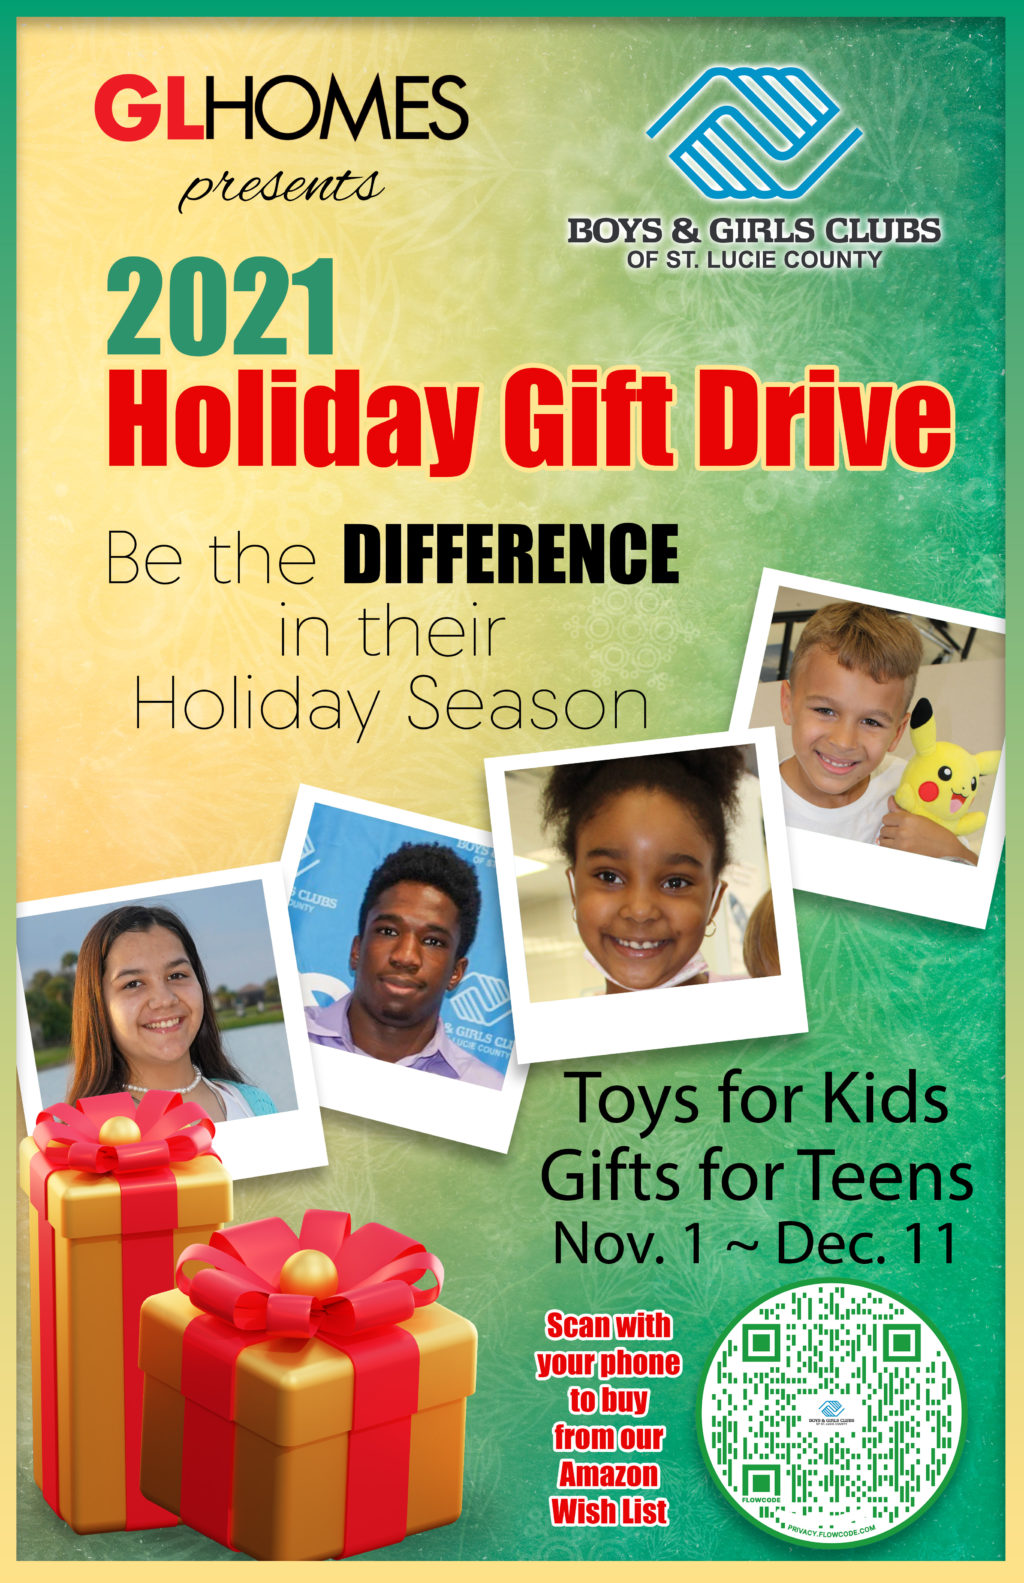 Boys & Girls Clubs of St. Lucie County Holiday Gift Drive